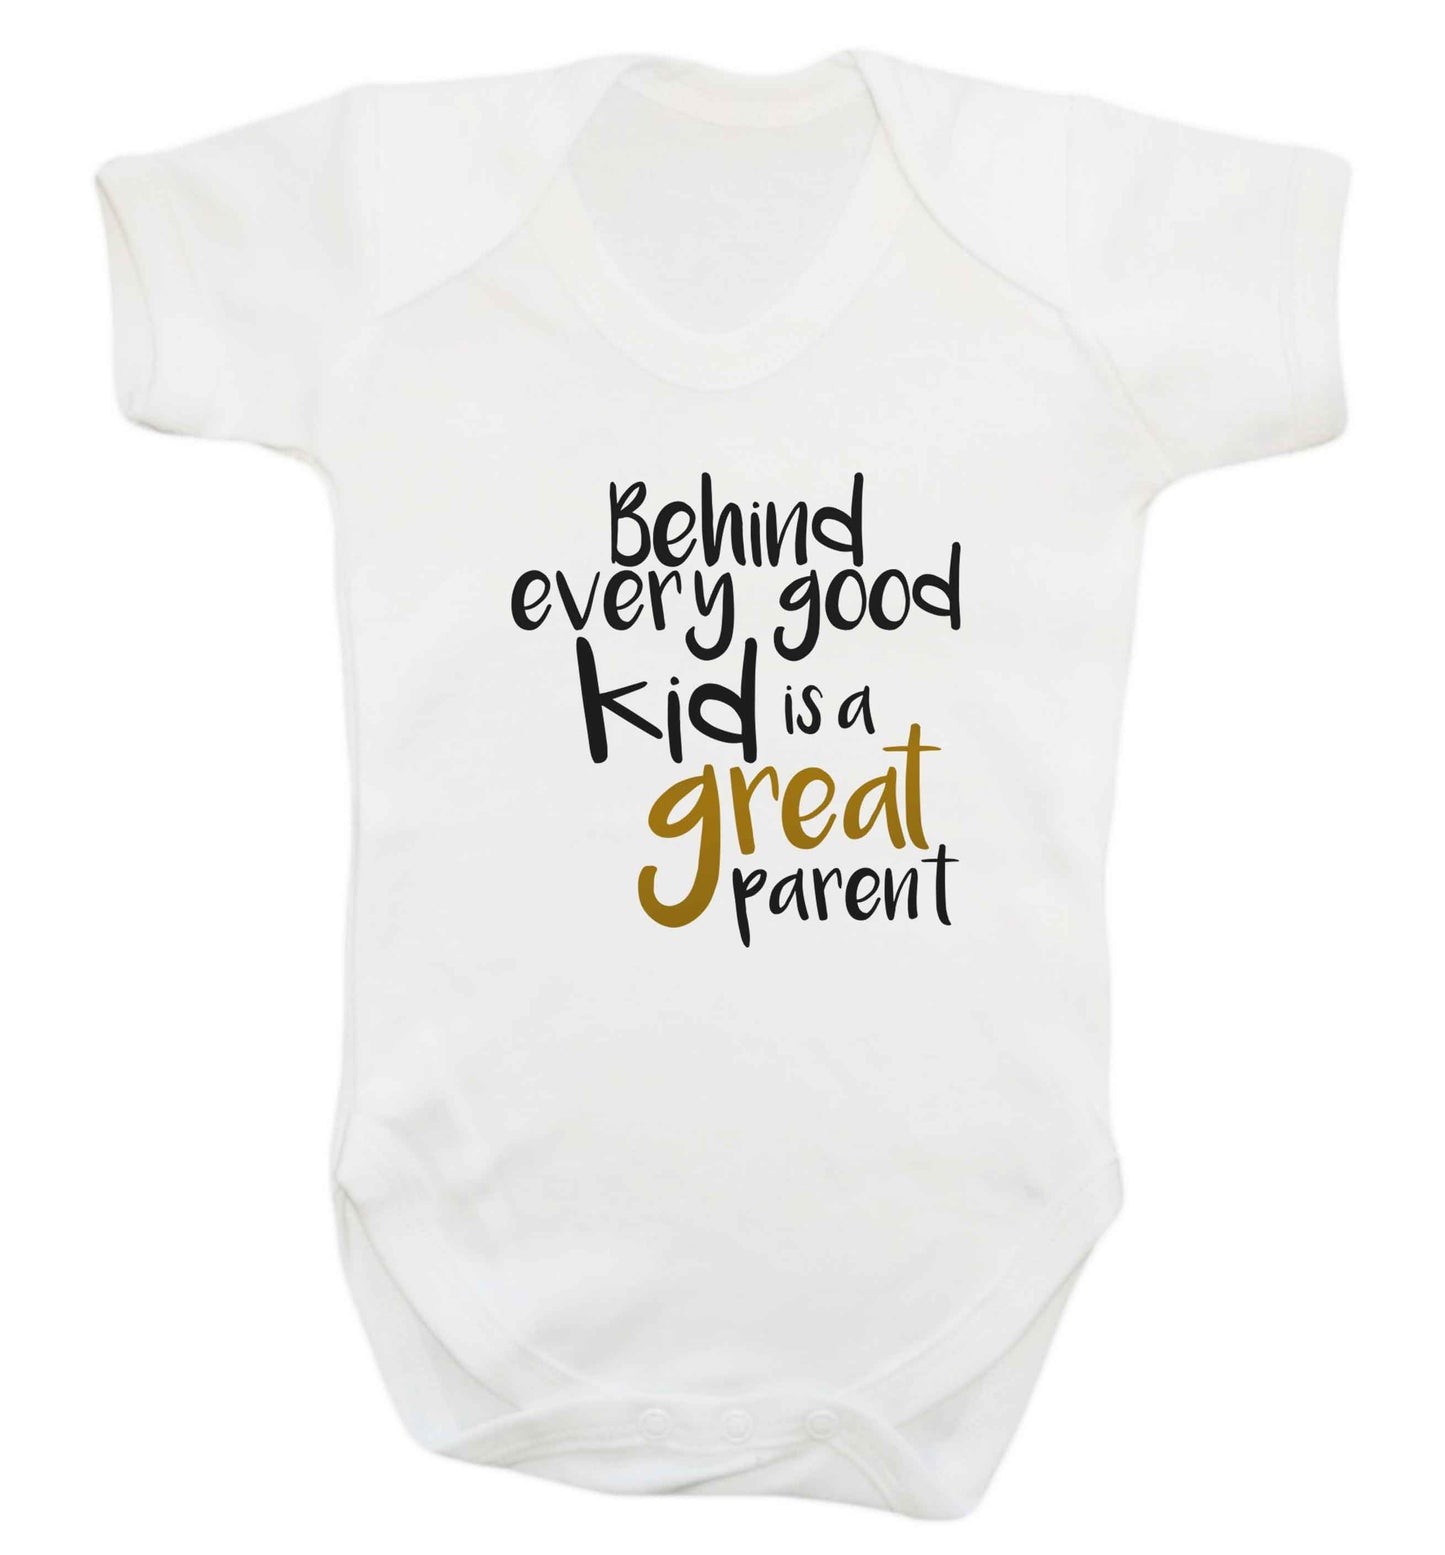 Behind every good kid is a great parent baby vest white 18-24 months